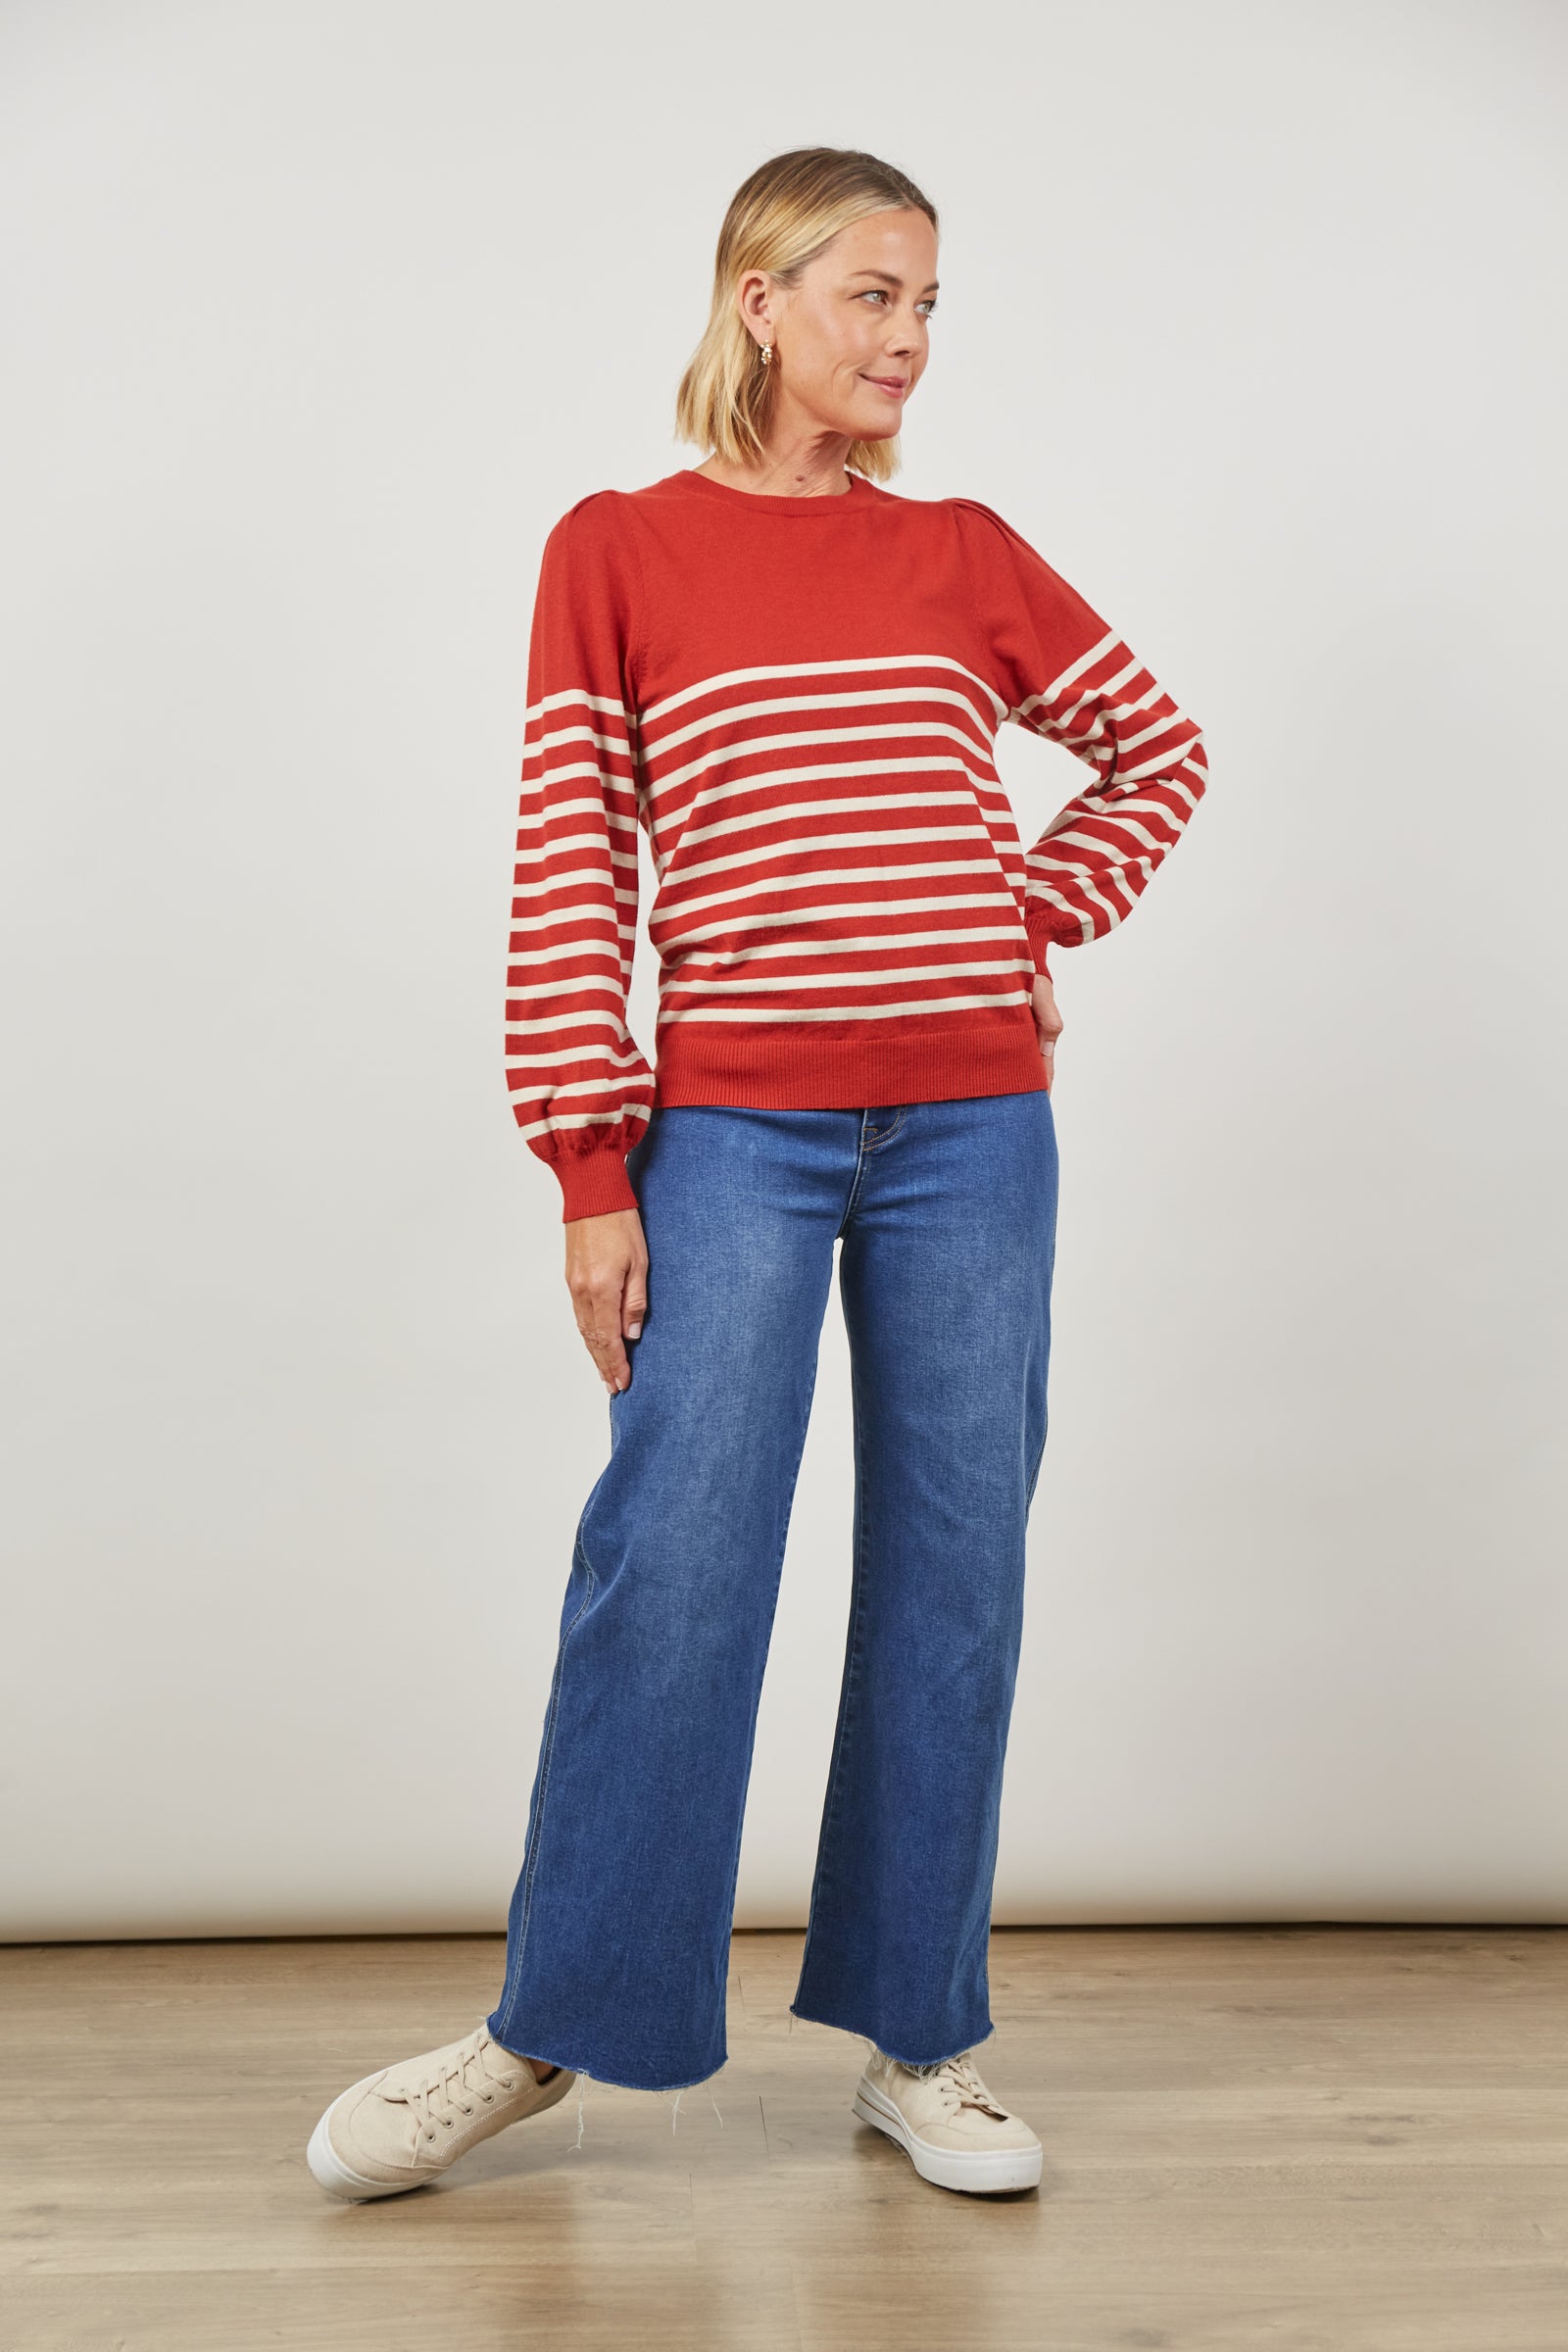 Cosmo Stripe Jumper - Picante - Isle of Mine Clothing - Knit Jumper